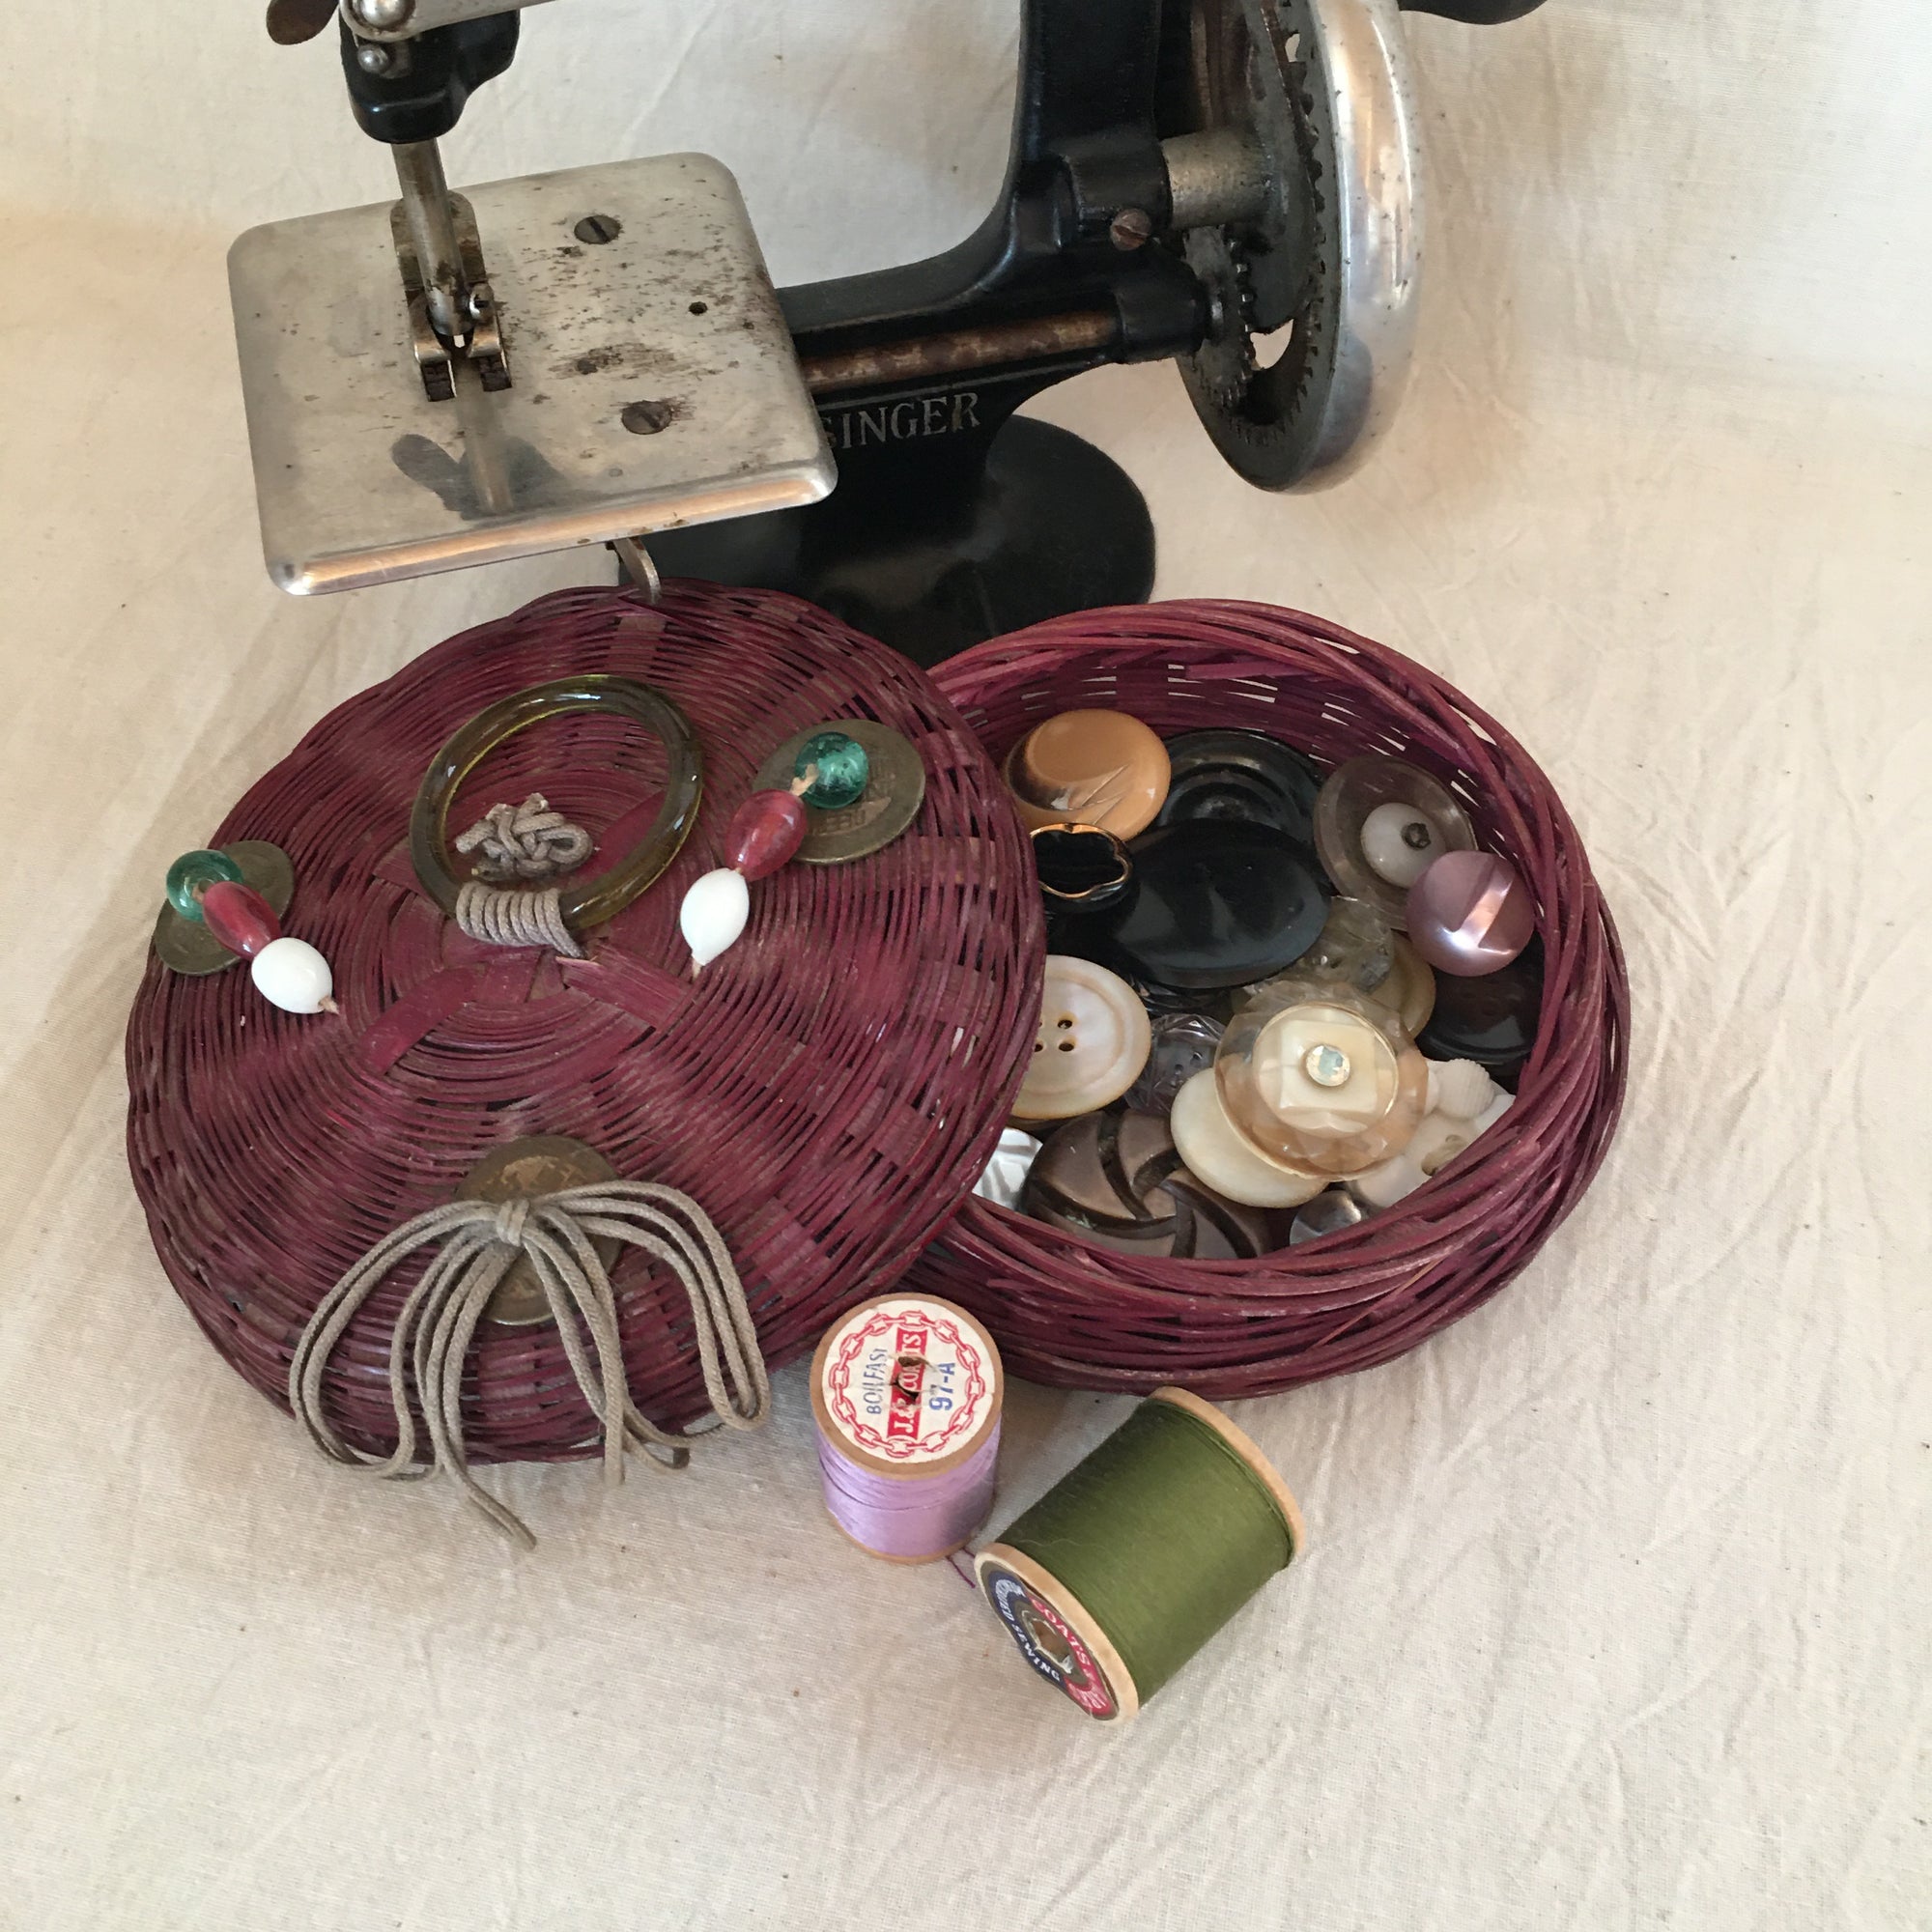 Vintage Sewing Basket with Buttons